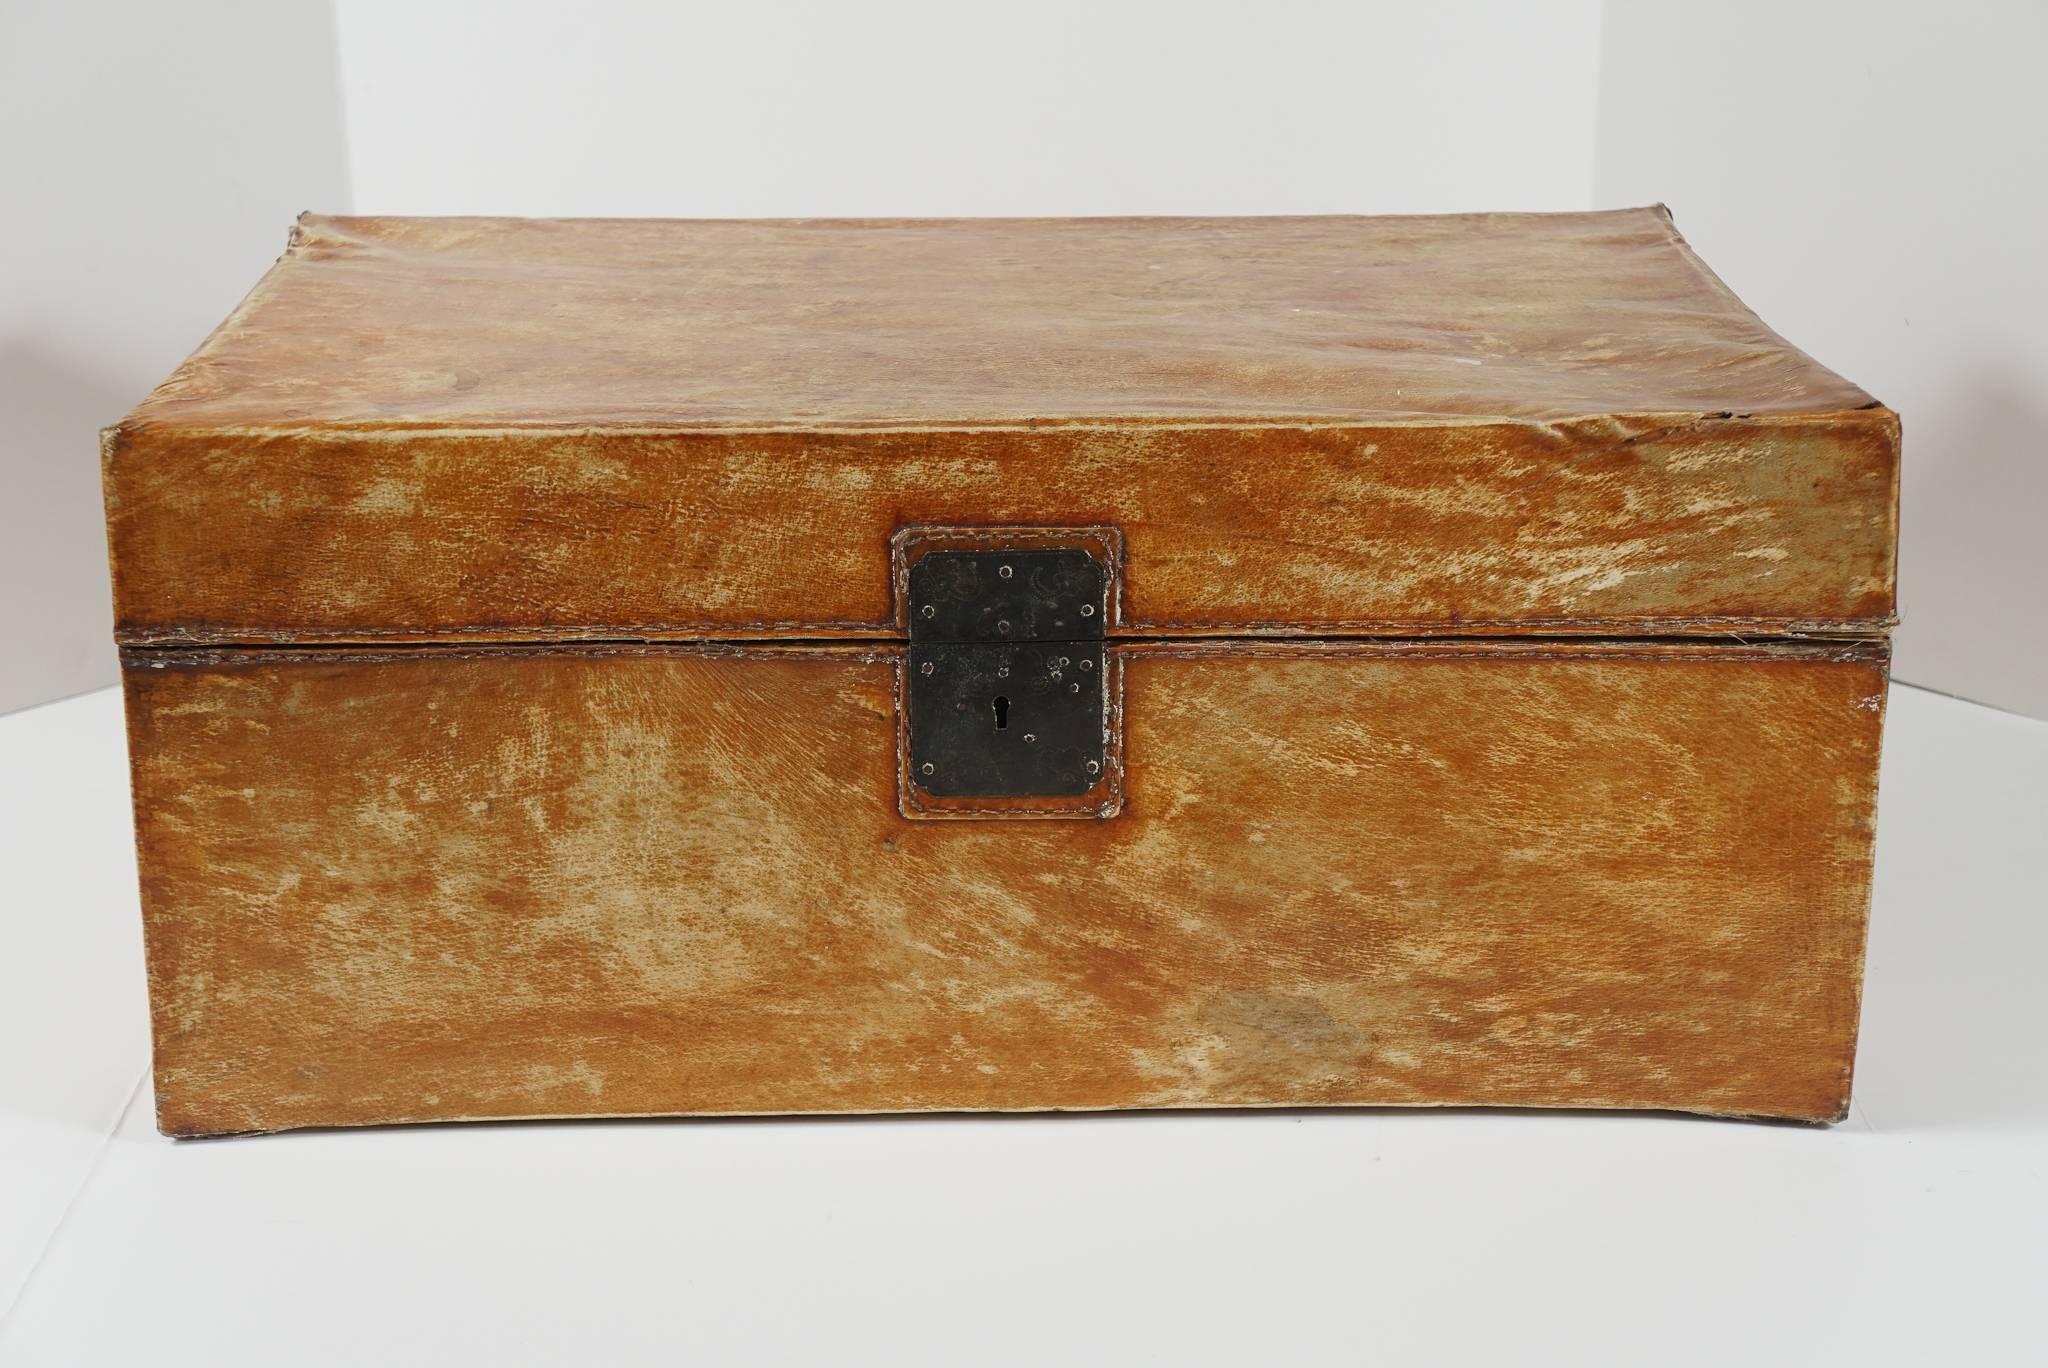 This lovely 19th-century small Chinese travel trunk is made from thin sheets of camphor wood covered in undercoated vanished pigskin. The trunk has gained a Fine old mellow sienna color due to age but still shows the light creamy color of the skin